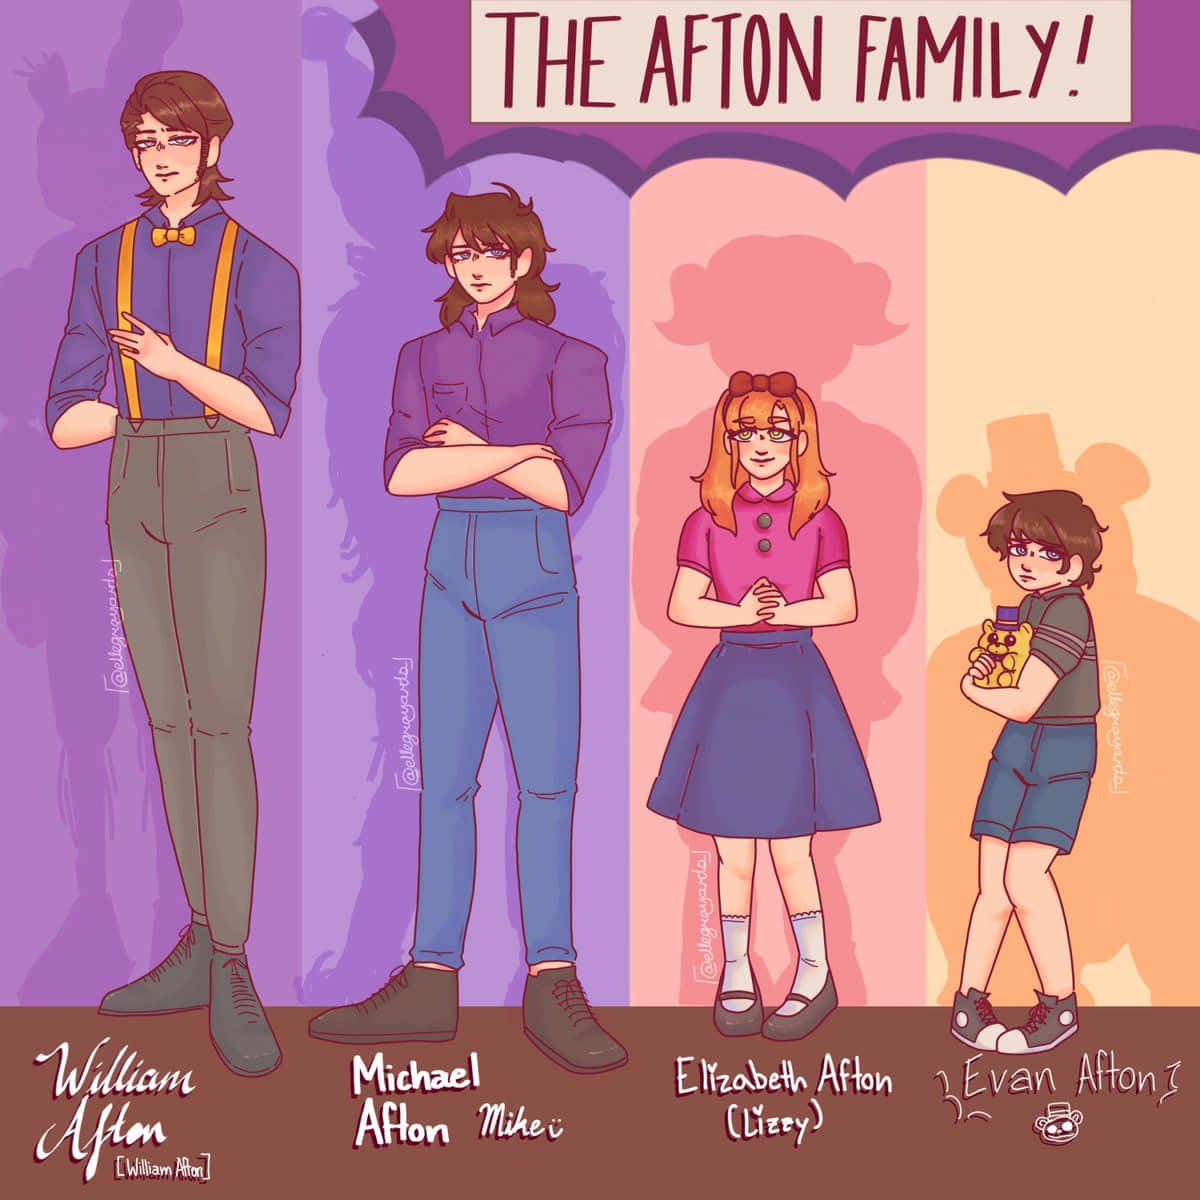 The afton family pictures